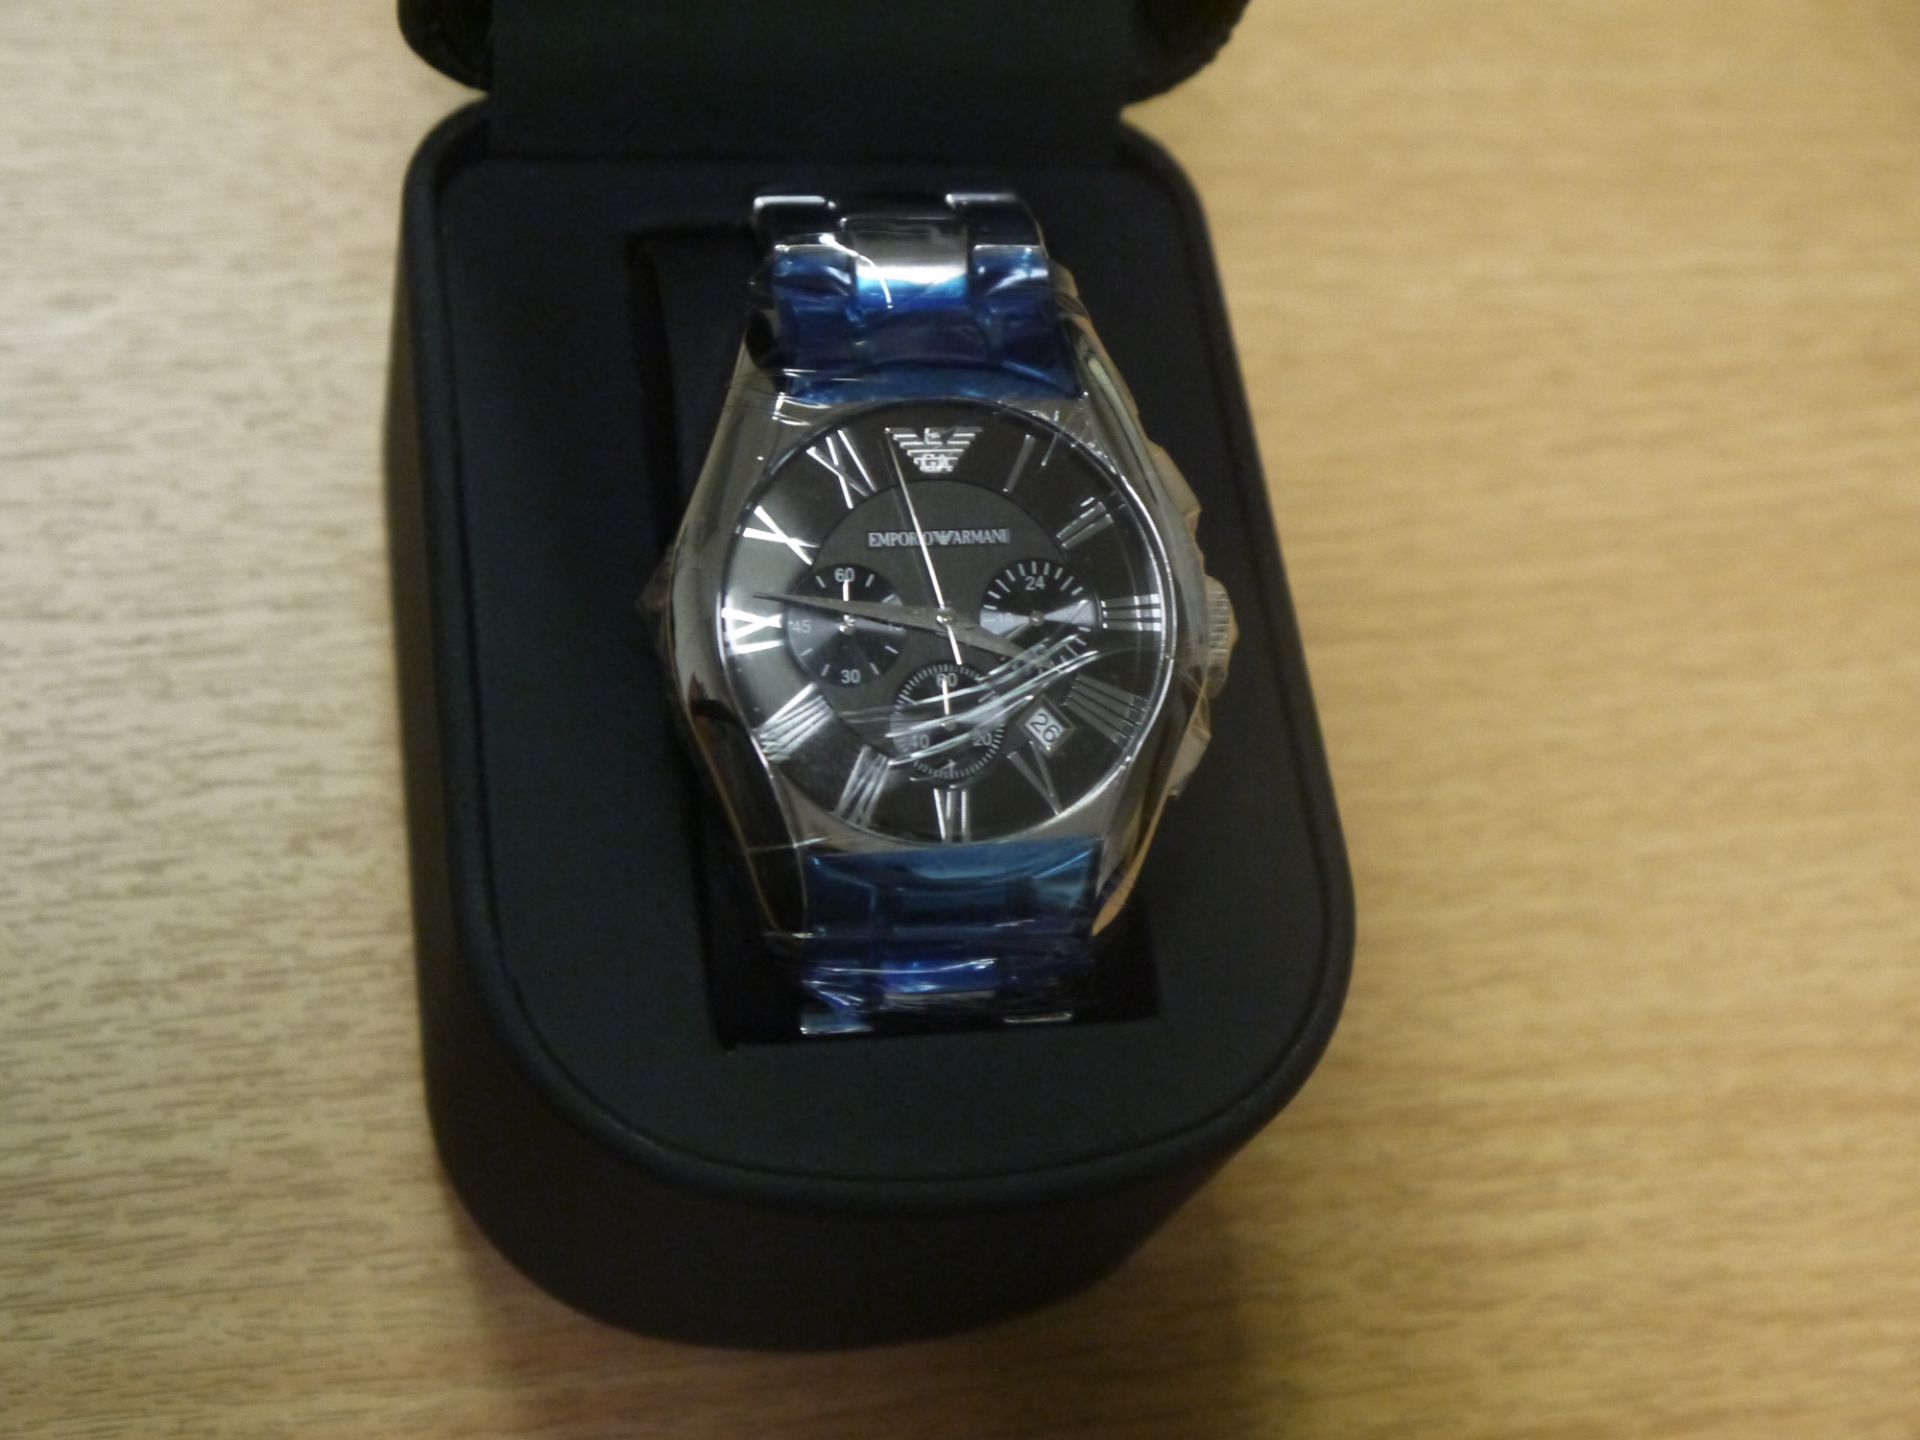 NO VAT!! Armani AR0673 Mens Chronograph Watch. New, boxed and ticking. RRP £296.00. See link.